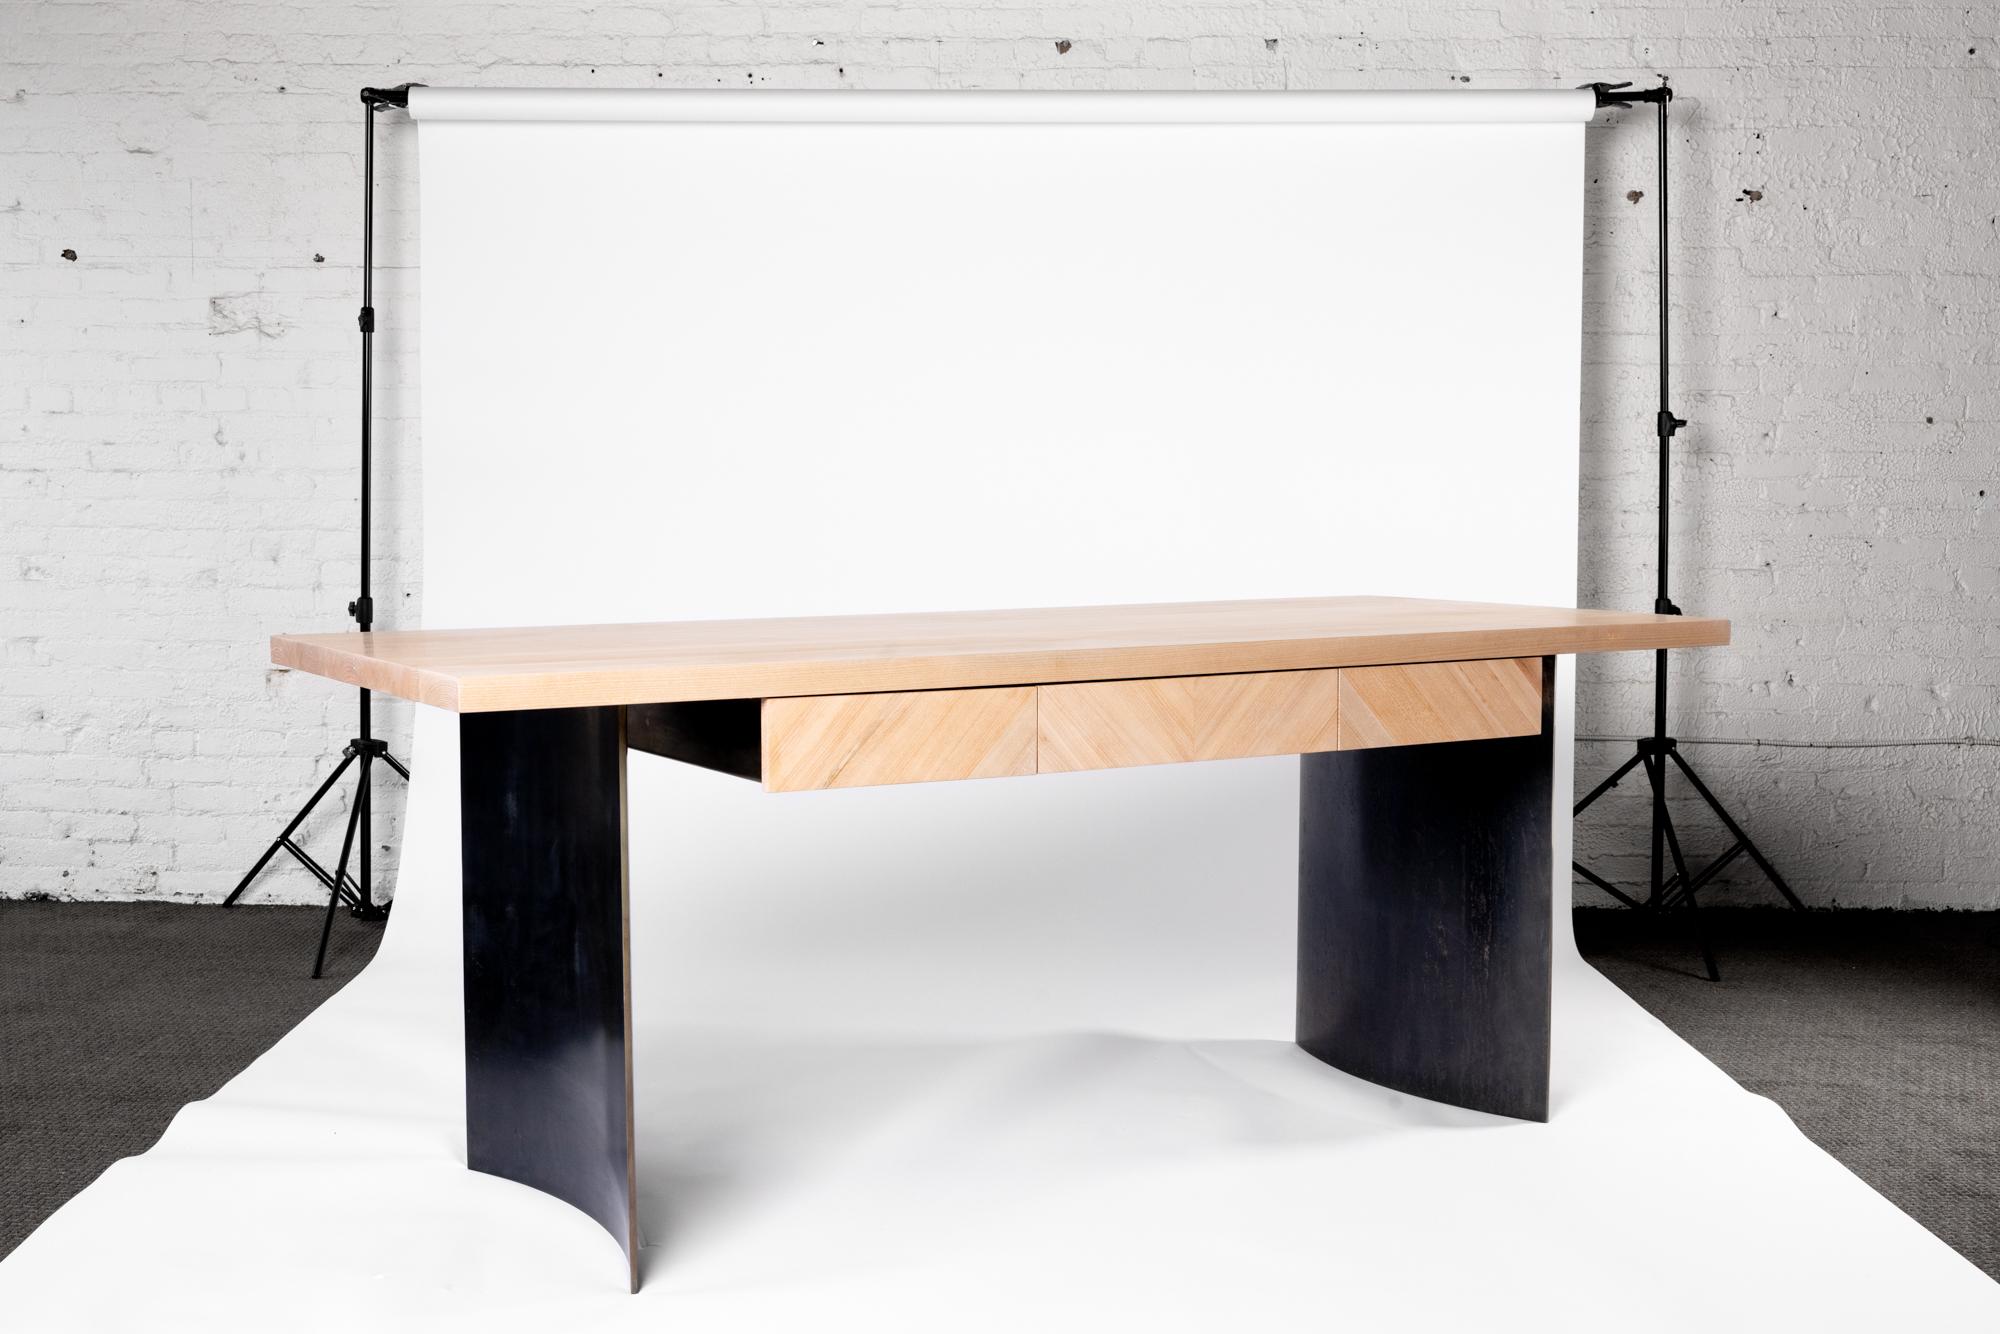 Introducing the Ban Desk by Autonomous Furniture, where timeless elegance meets industrial edge, crafted to elevate your workspace with unparalleled sophistication.

Imagine your workspace transformed by the sleek lines and impeccable craftsmanship